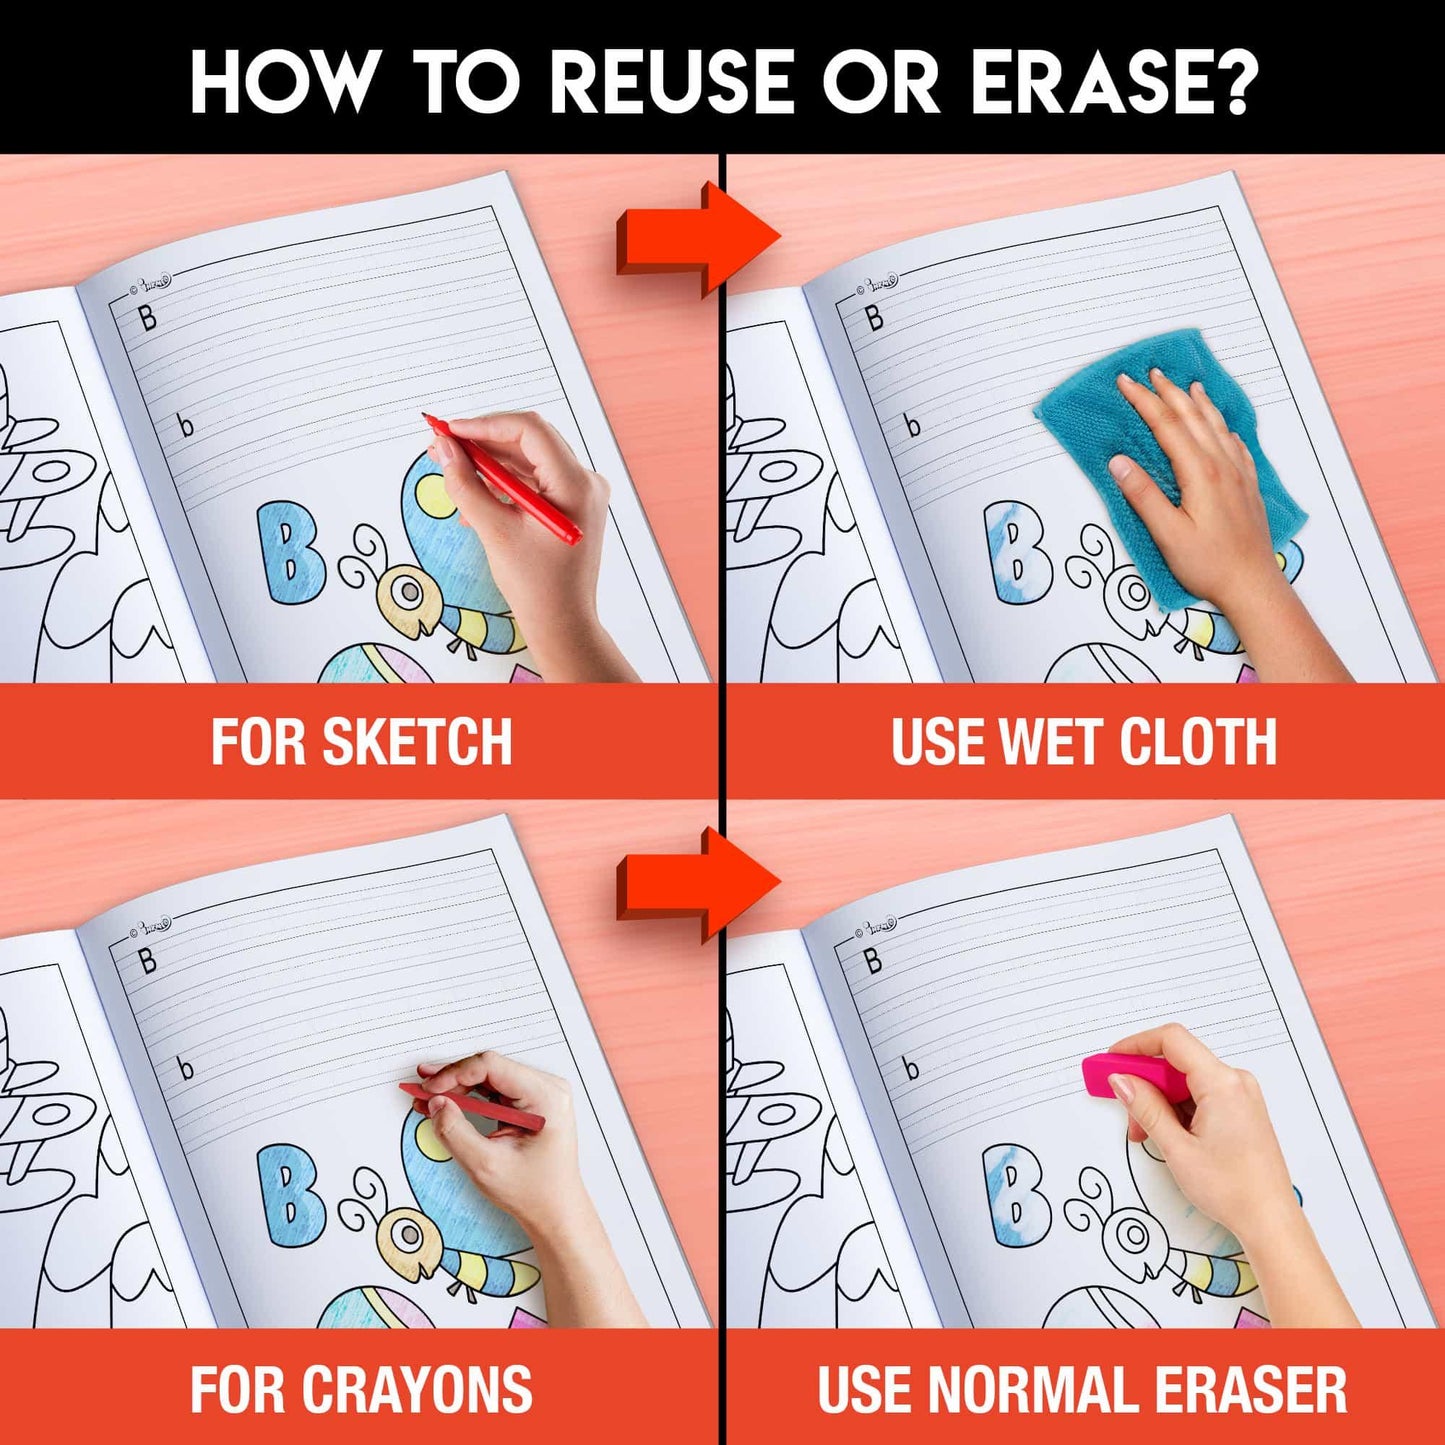 The image has a red background with four pictures demonstrating how to reuse or erase: the first picture depicts sketching on the sheet, the second shows using a wet cloth to remove sketches, the third image displays crayons colouring on the sheet, and the fourth image illustrates erasing crayons with a regular eraser.